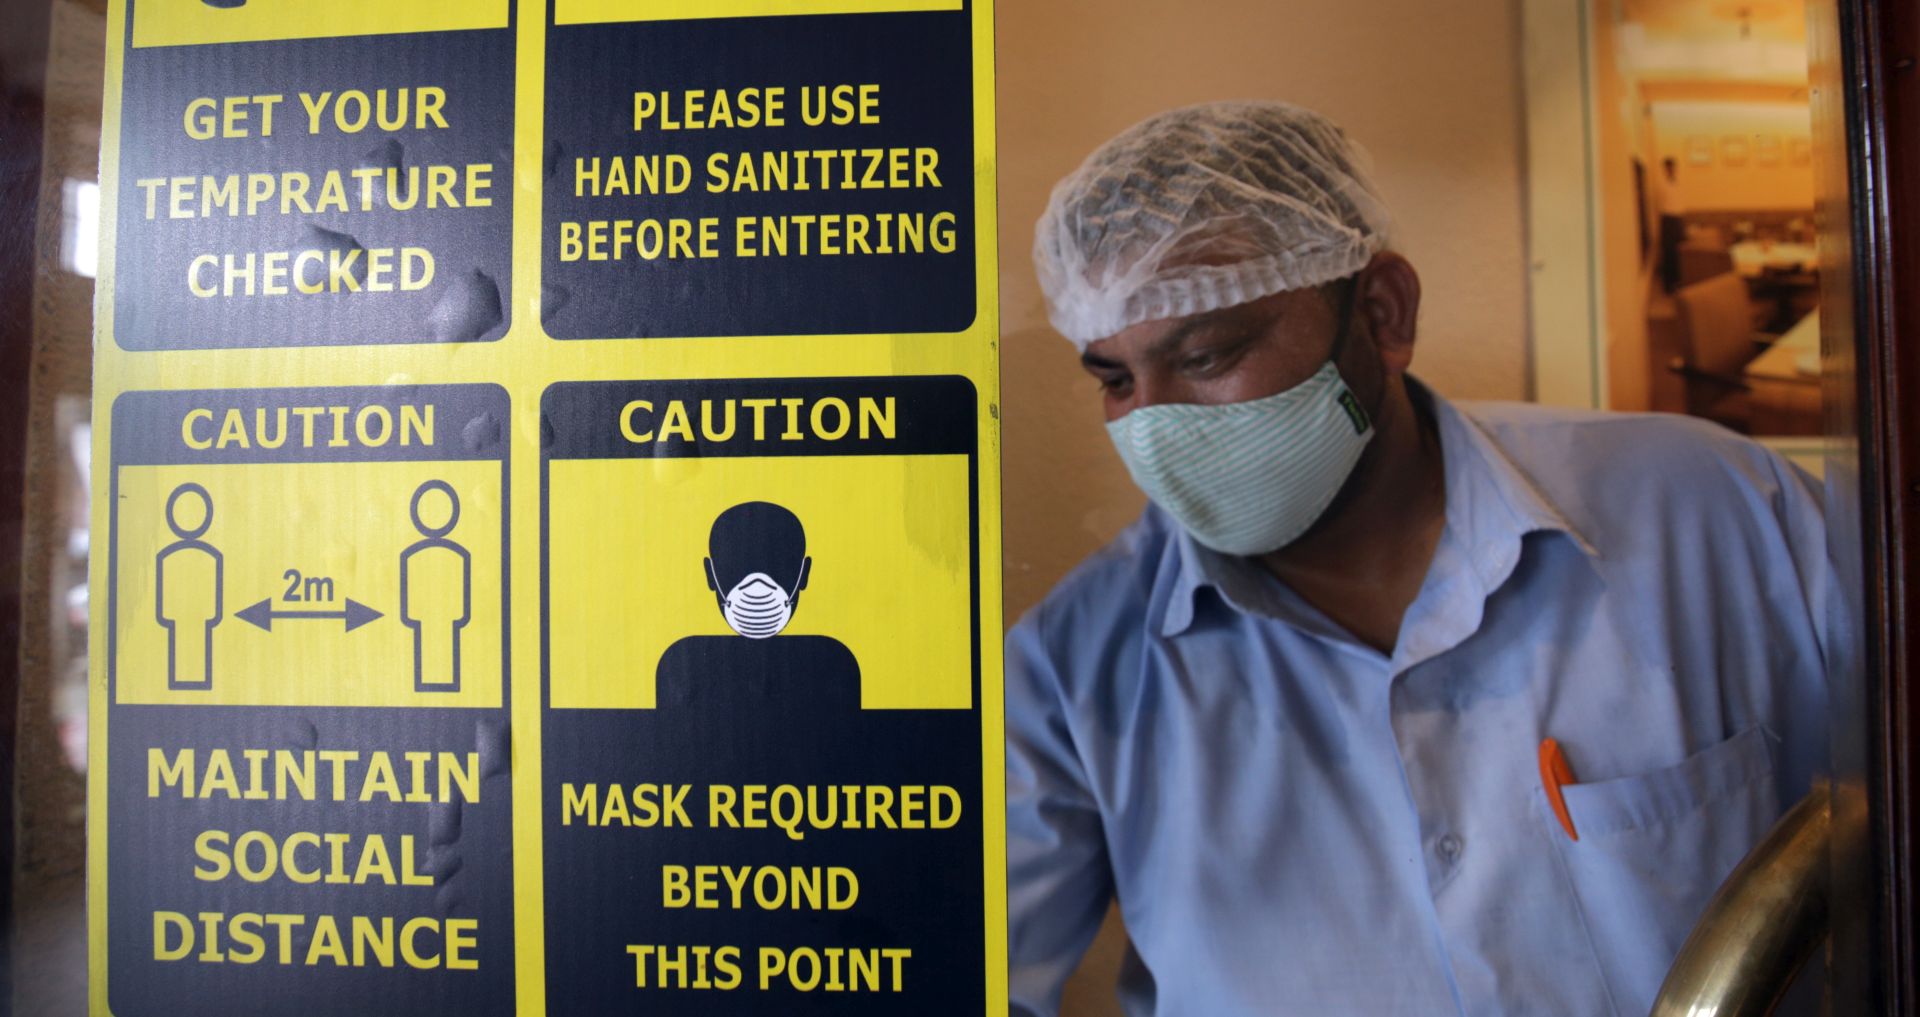 epa08624626 Signs for precautions against novel coronavirus which causes Covid19 disease are displayed on a door as a worker cleans its glass at the Astoria Food Pavilion restaurant, after easing some restrictions in wake of Covid19 pandemic, in Amritsar, India, 25 August 2020. According to new guidelines by the state government, the restaurants and food joints are allowed to remain open till half past six in the evening, with dine-in and take away facilities provided to the customers. Coronavirus related cases have crossed the three million mark in India.  EPA/RAMINDER PAL SINGH